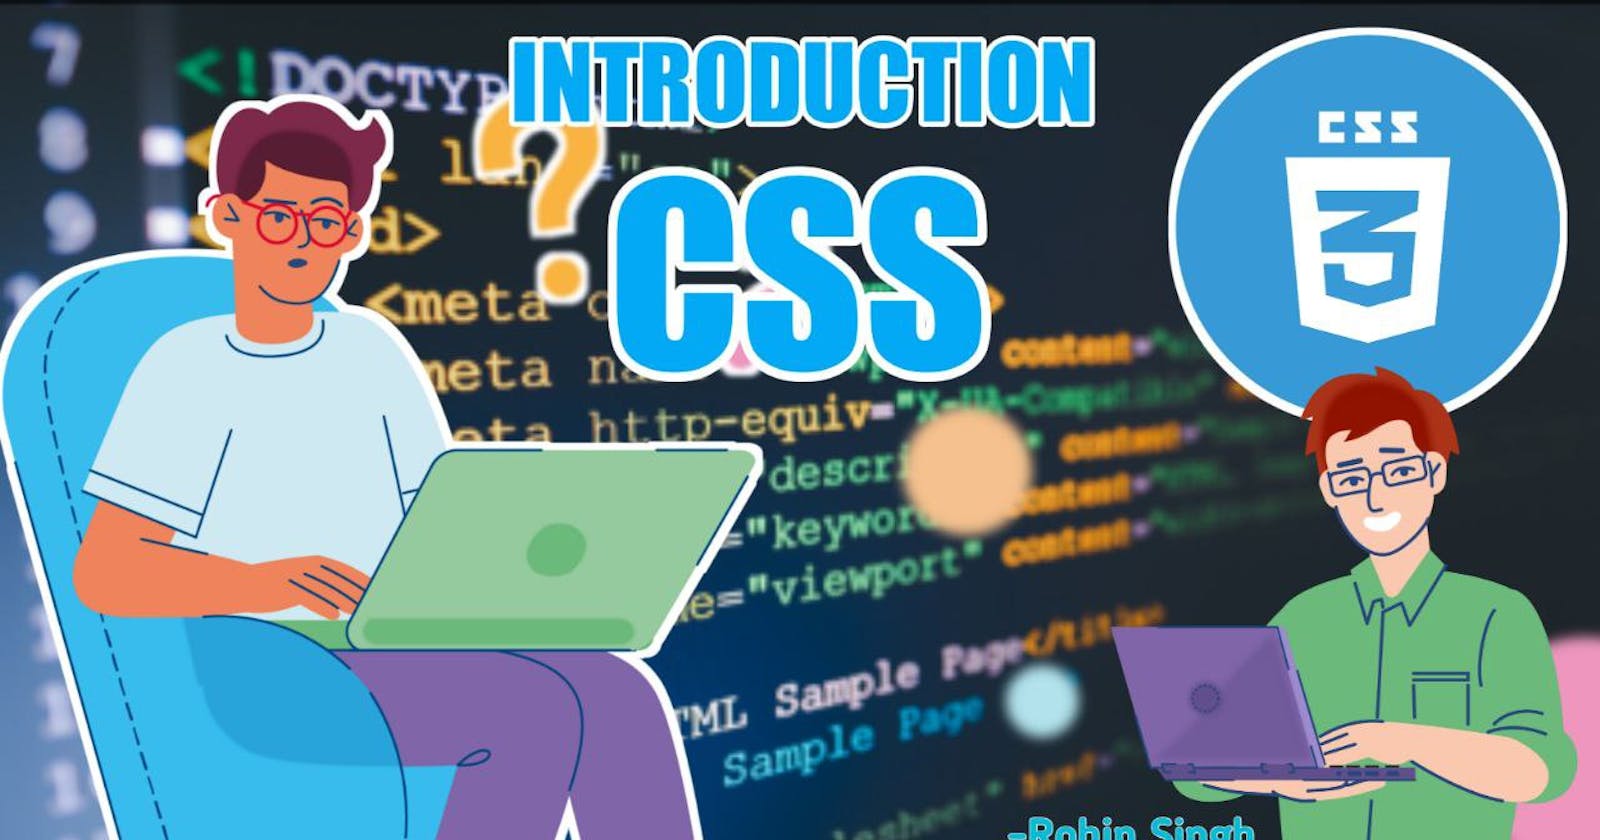 Basic information of CSS*